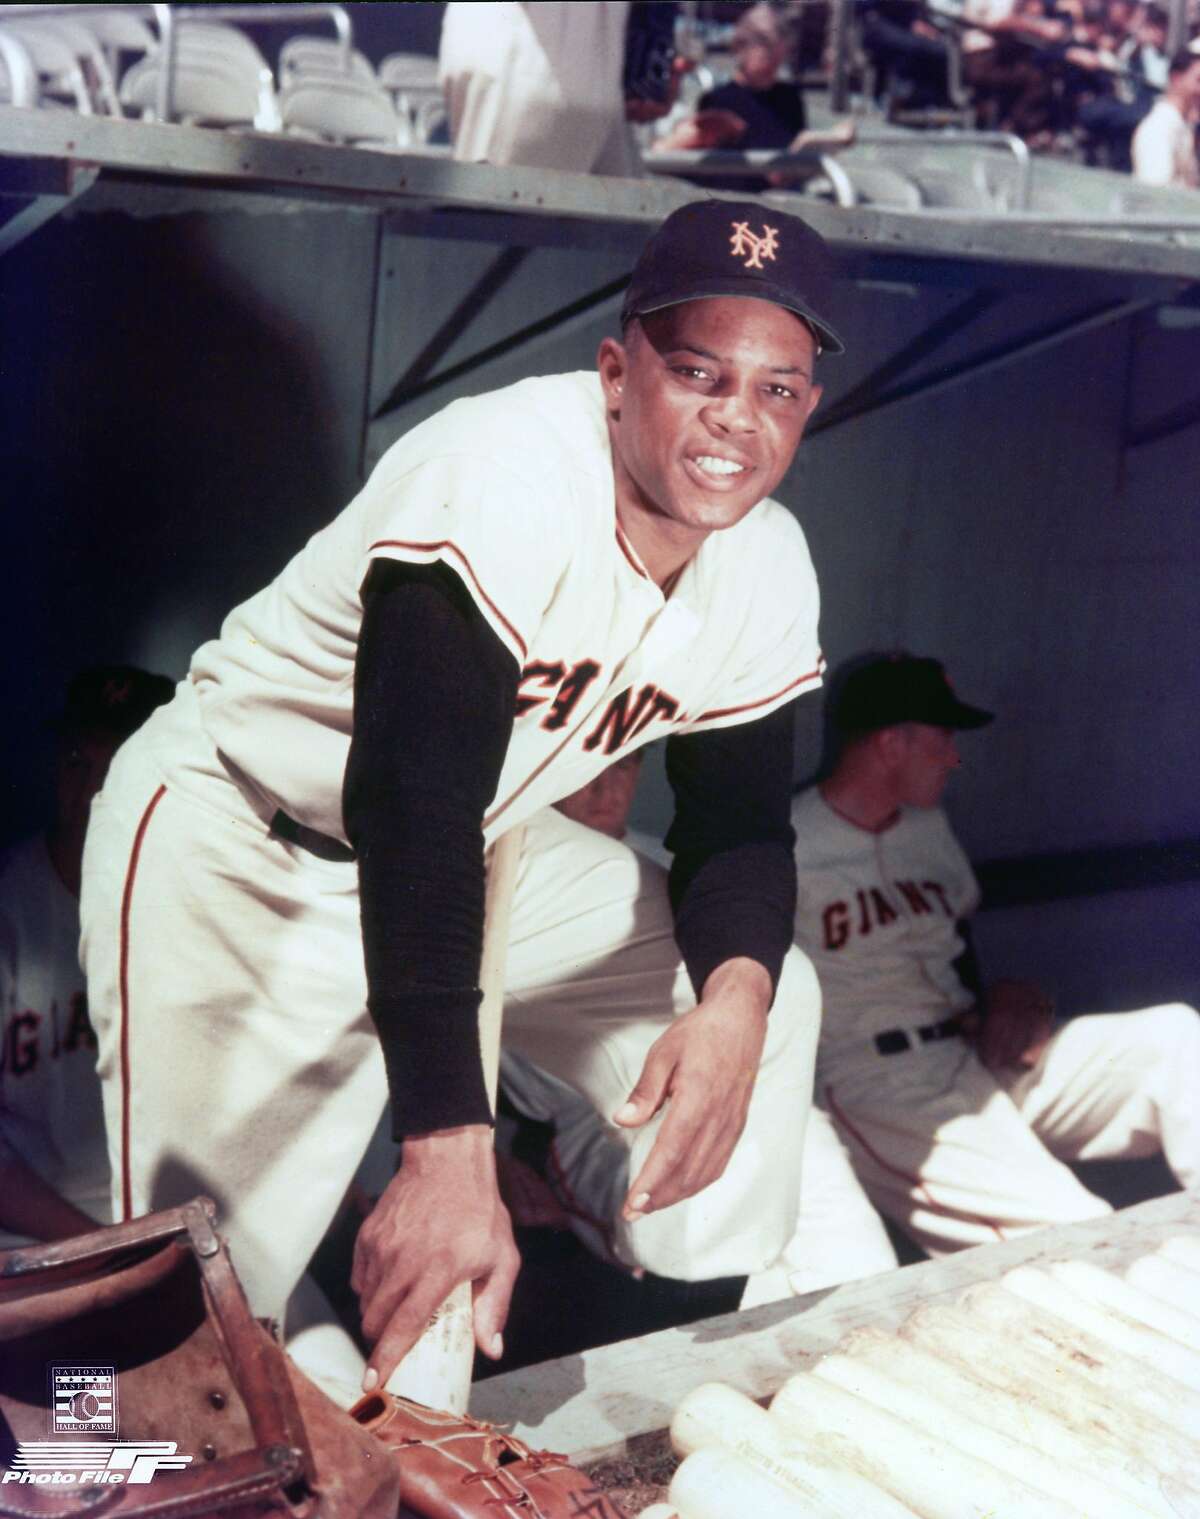 UNDATED: Willie Mays of the New York Giants poses for a portrait during a season game. Willie Mays played for the New York Giants from 1951-1957. (Photo by Photo File/MLB Photos via Getty Images)